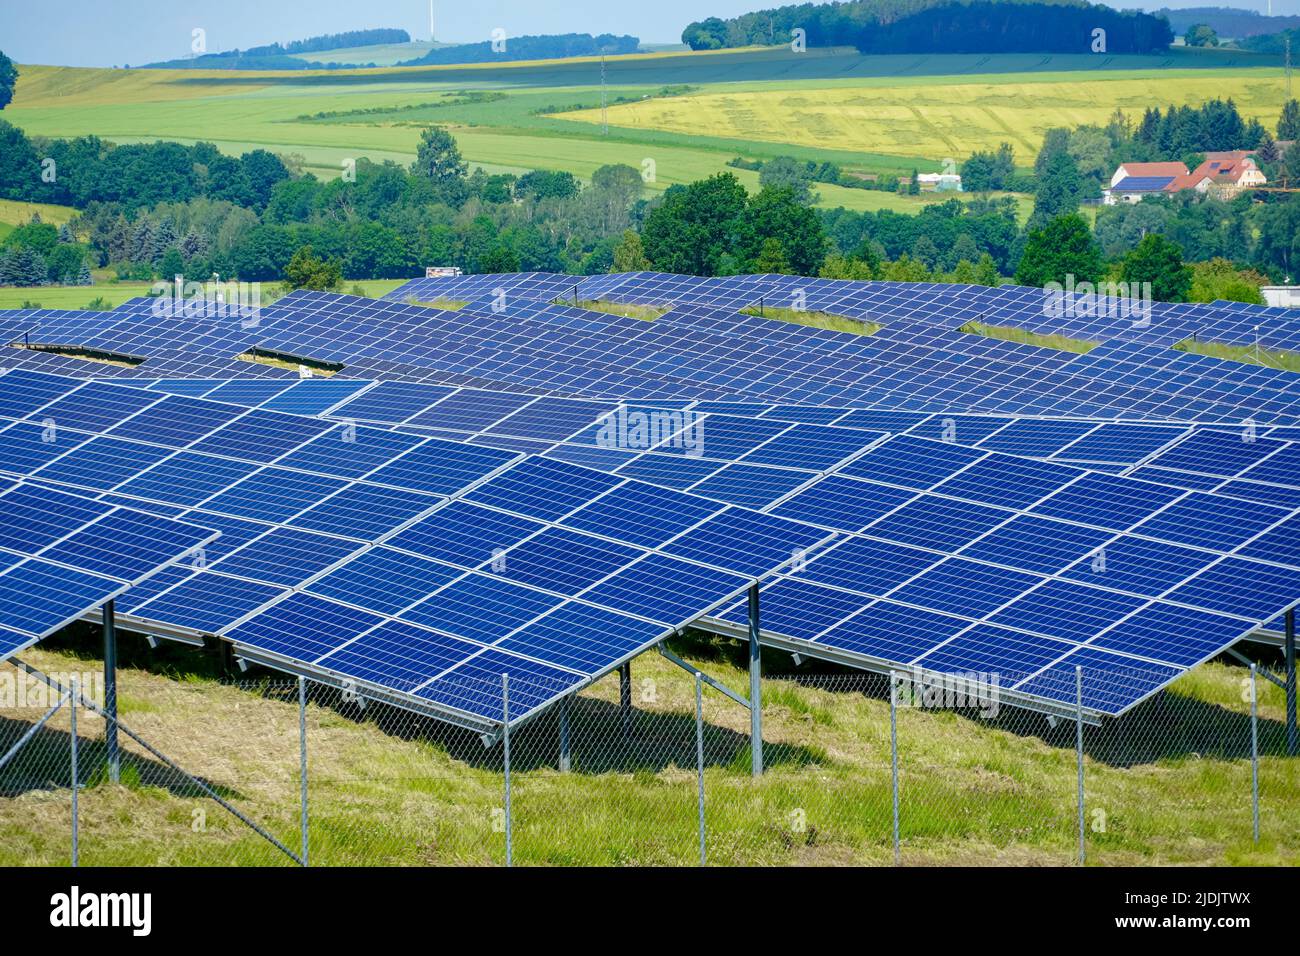 Cheap and eco energy from solar panels Stock Photo